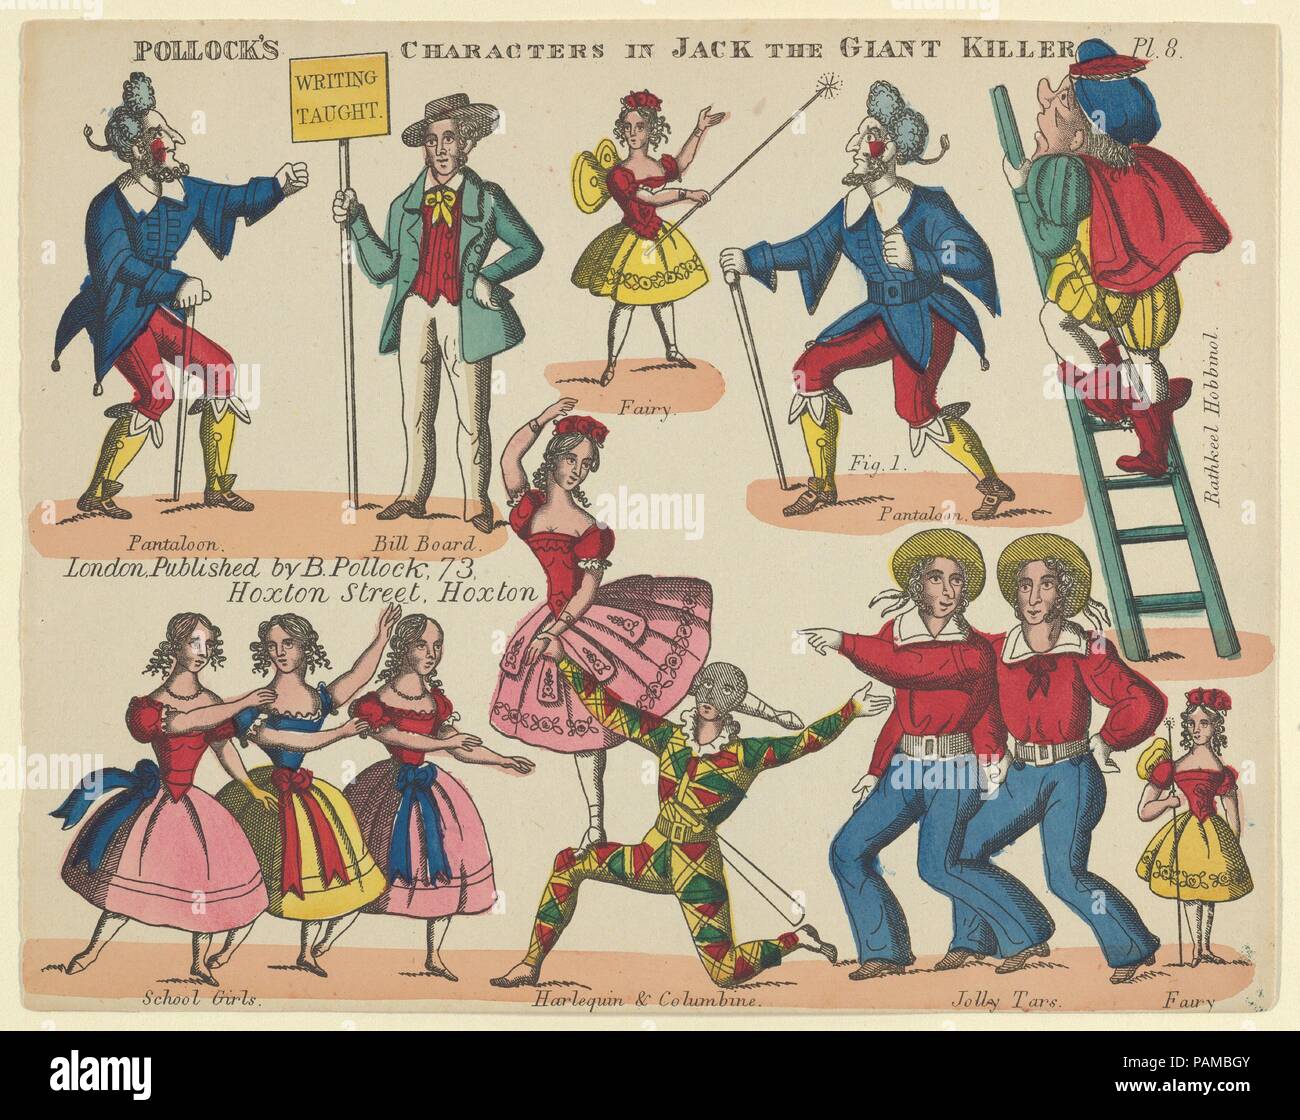 Characters, from Jack and the Giant Killer, Plate 8 for a Toy Theater. Dimensions: Sheet: 6 11/16 × 8 7/16 in. (17 × 21.4 cm). Publisher: Benjamin Pollock (British, 1857-1937). Date: 1870-90. Museum: Metropolitan Museum of Art, New York, USA. Stock Photo